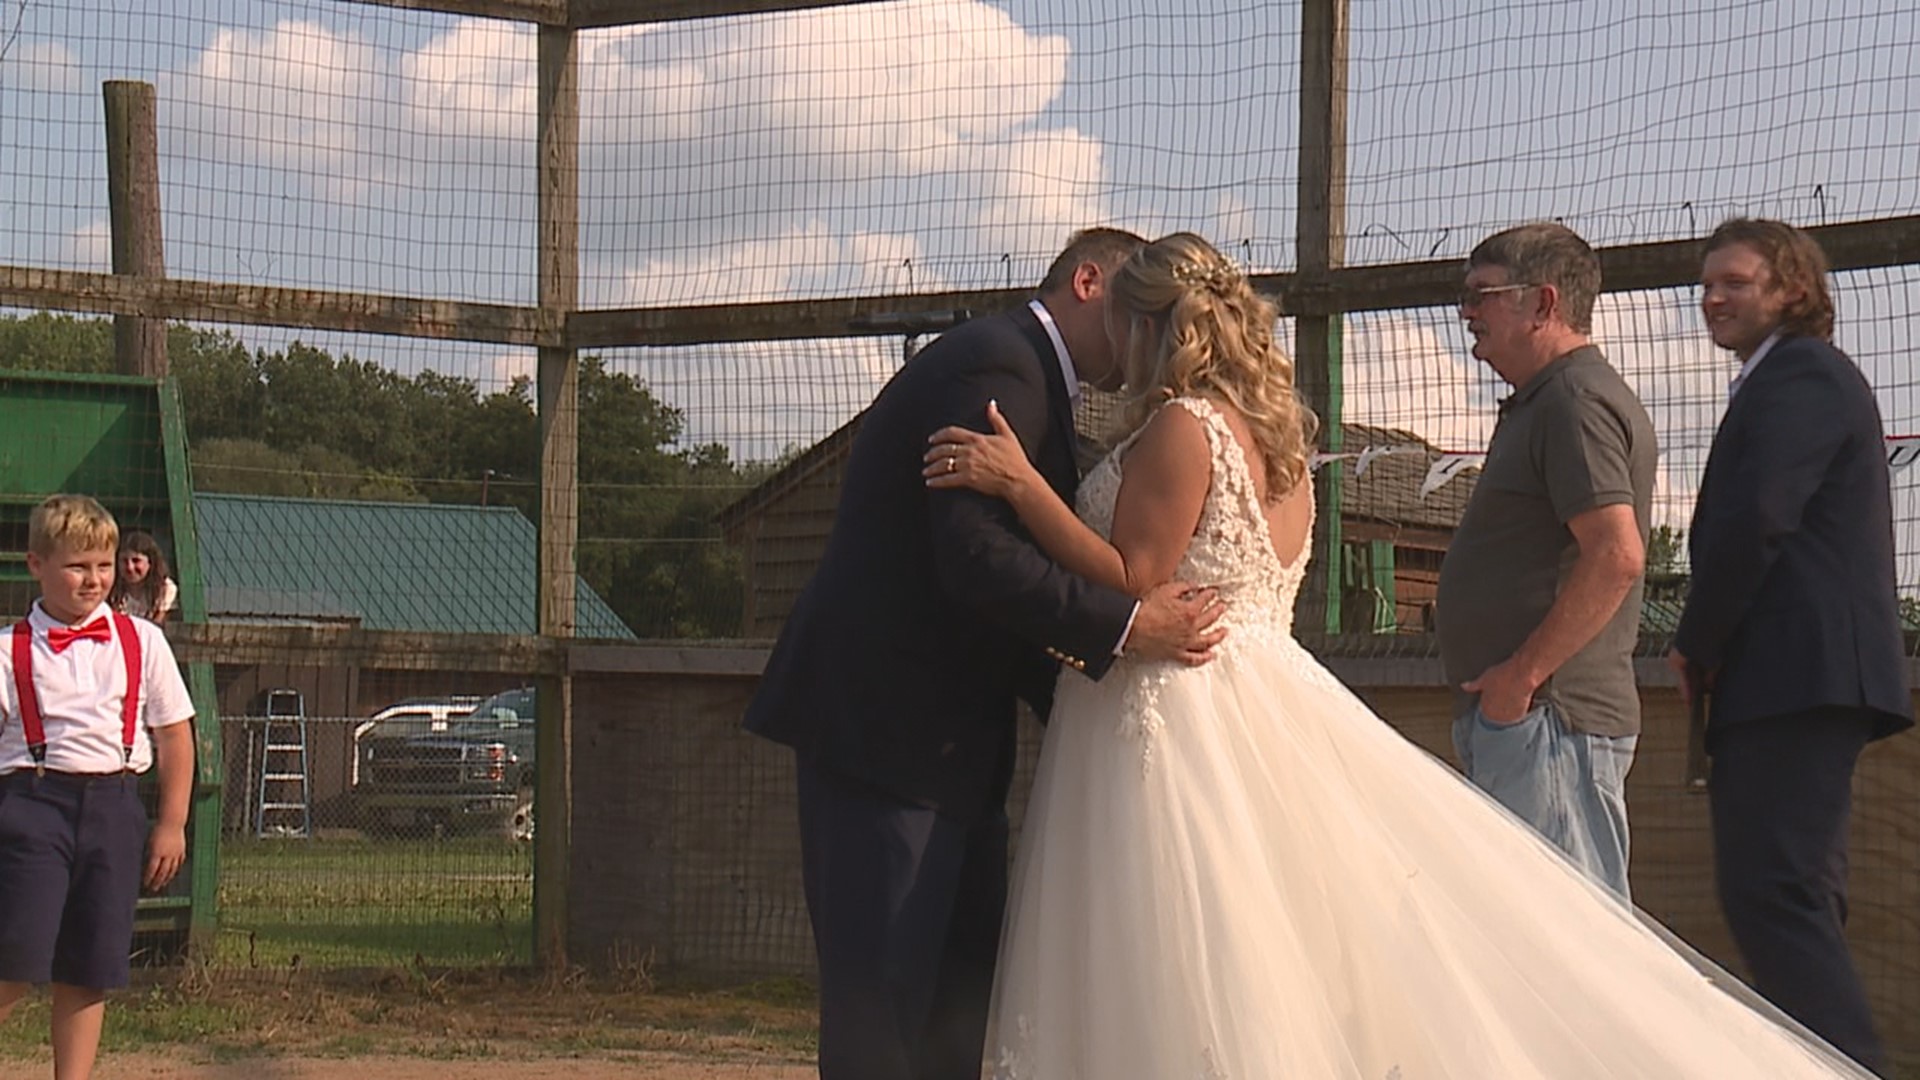 Kelly McNally has Stage 5 kidney failure and wanted to surprise her fiancé of 12 years by tying the knot.